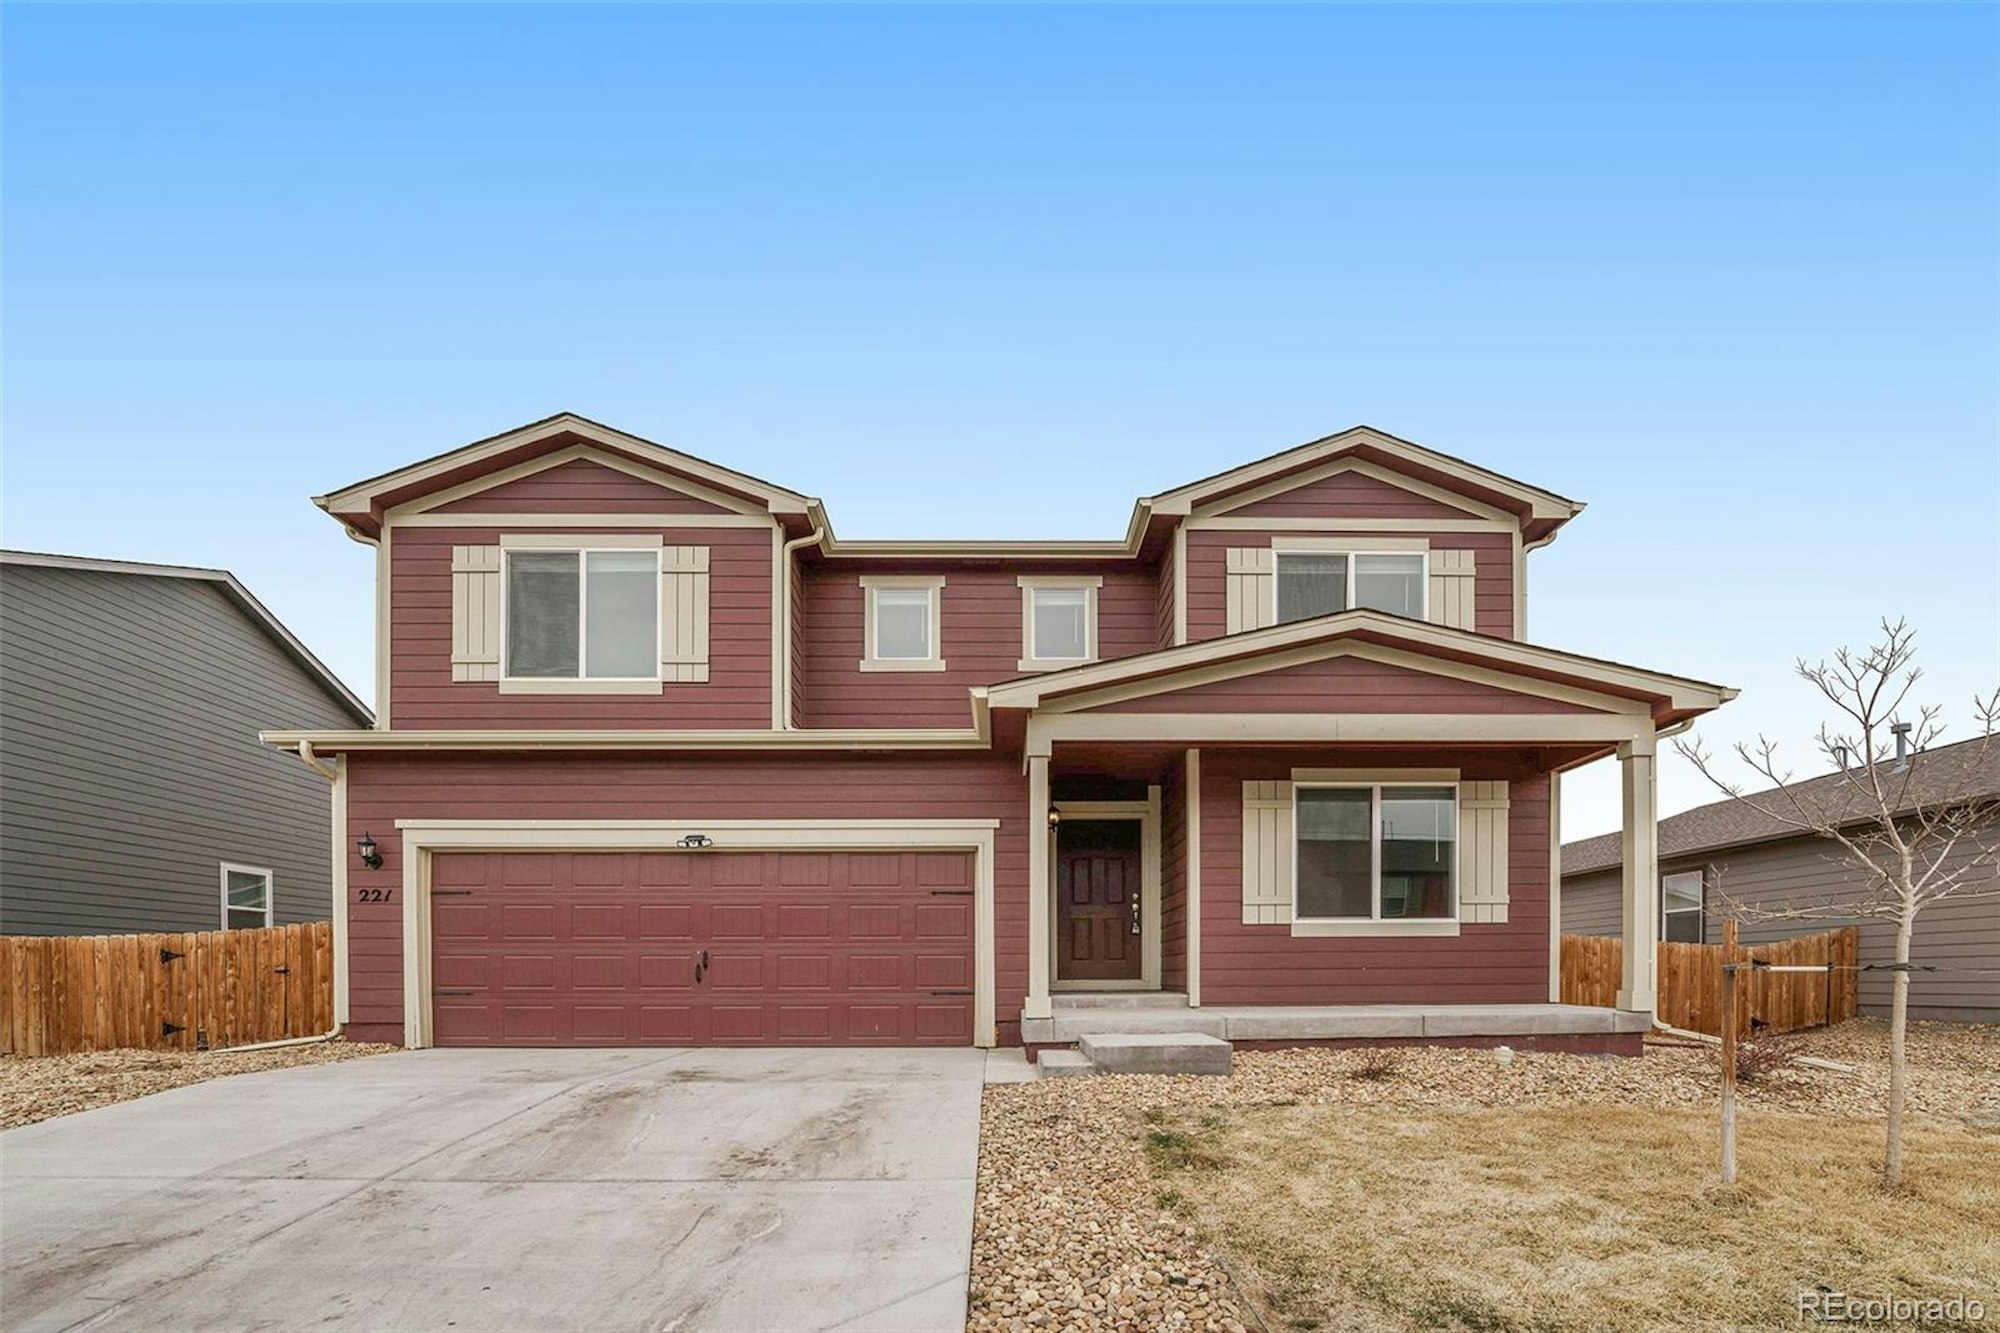 Photo 1 of 17 - 221 Mesa Ave, Lochbuie, CO 80603